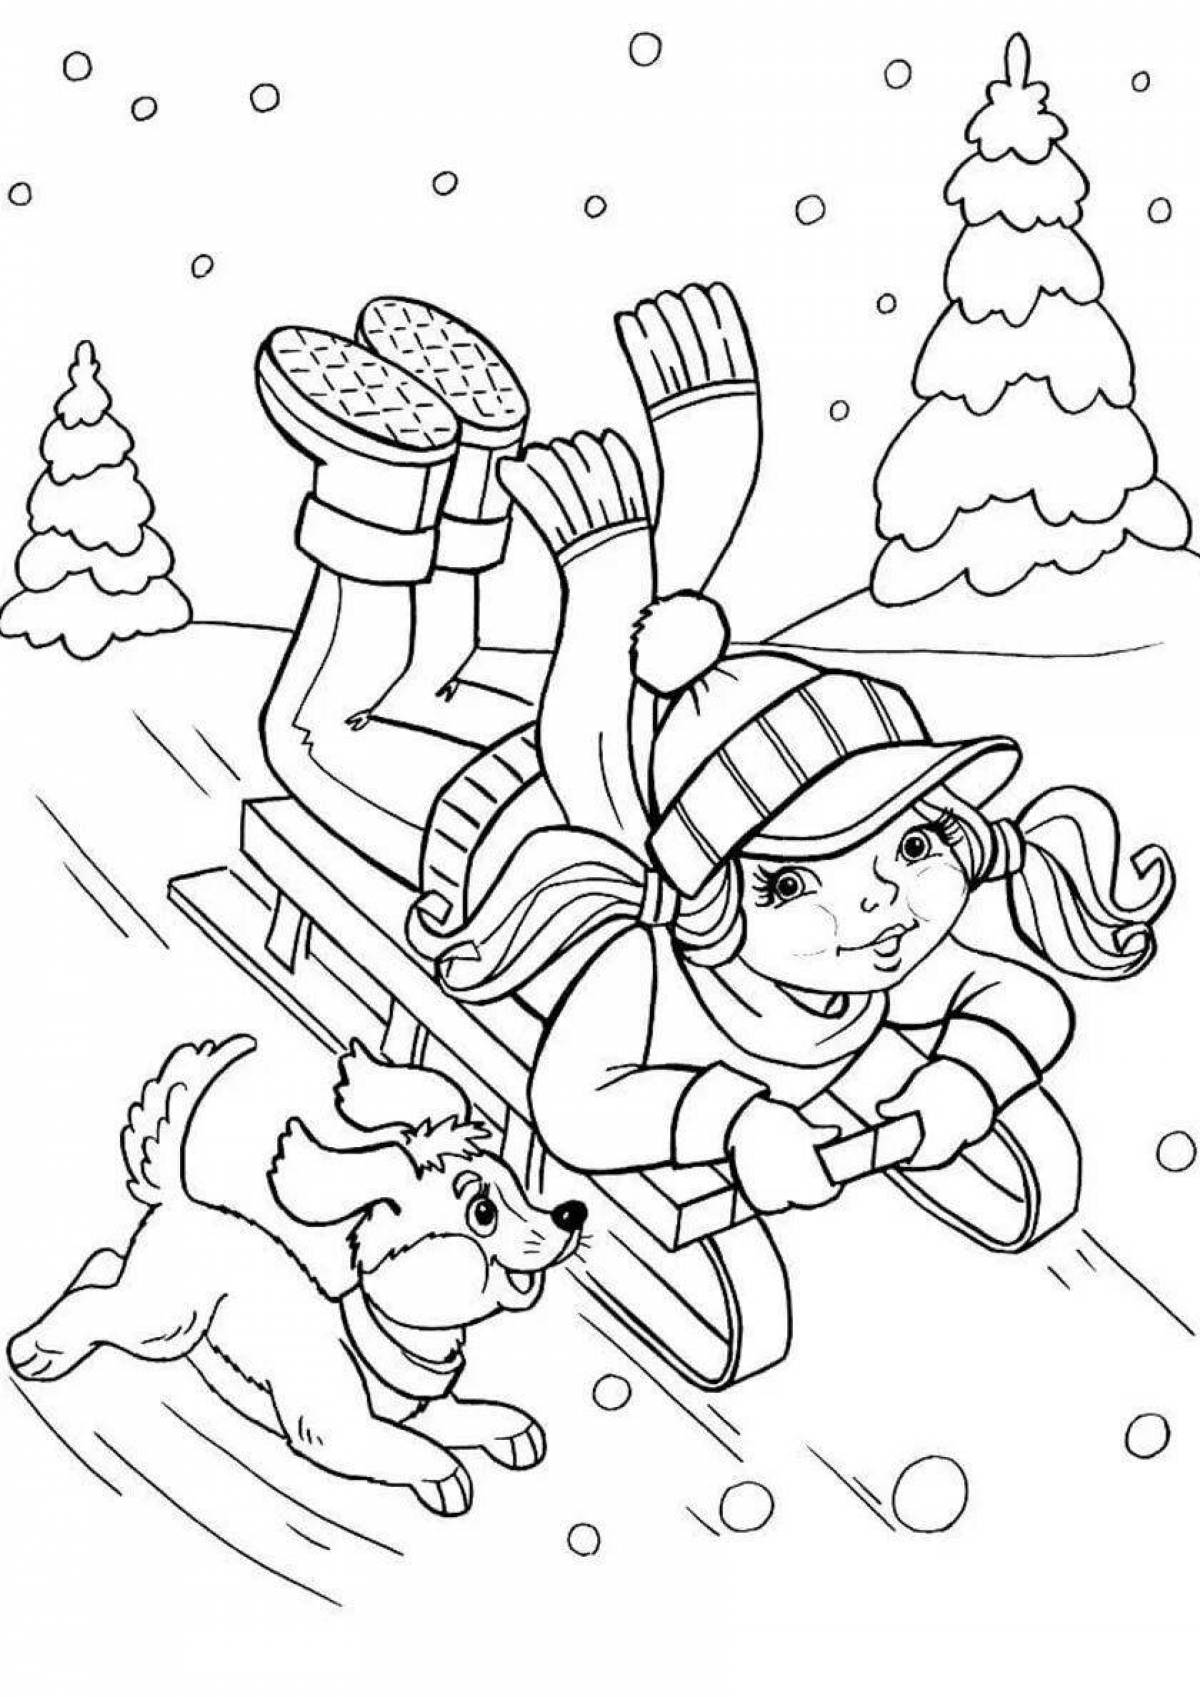 Colorful children's funny coloring book